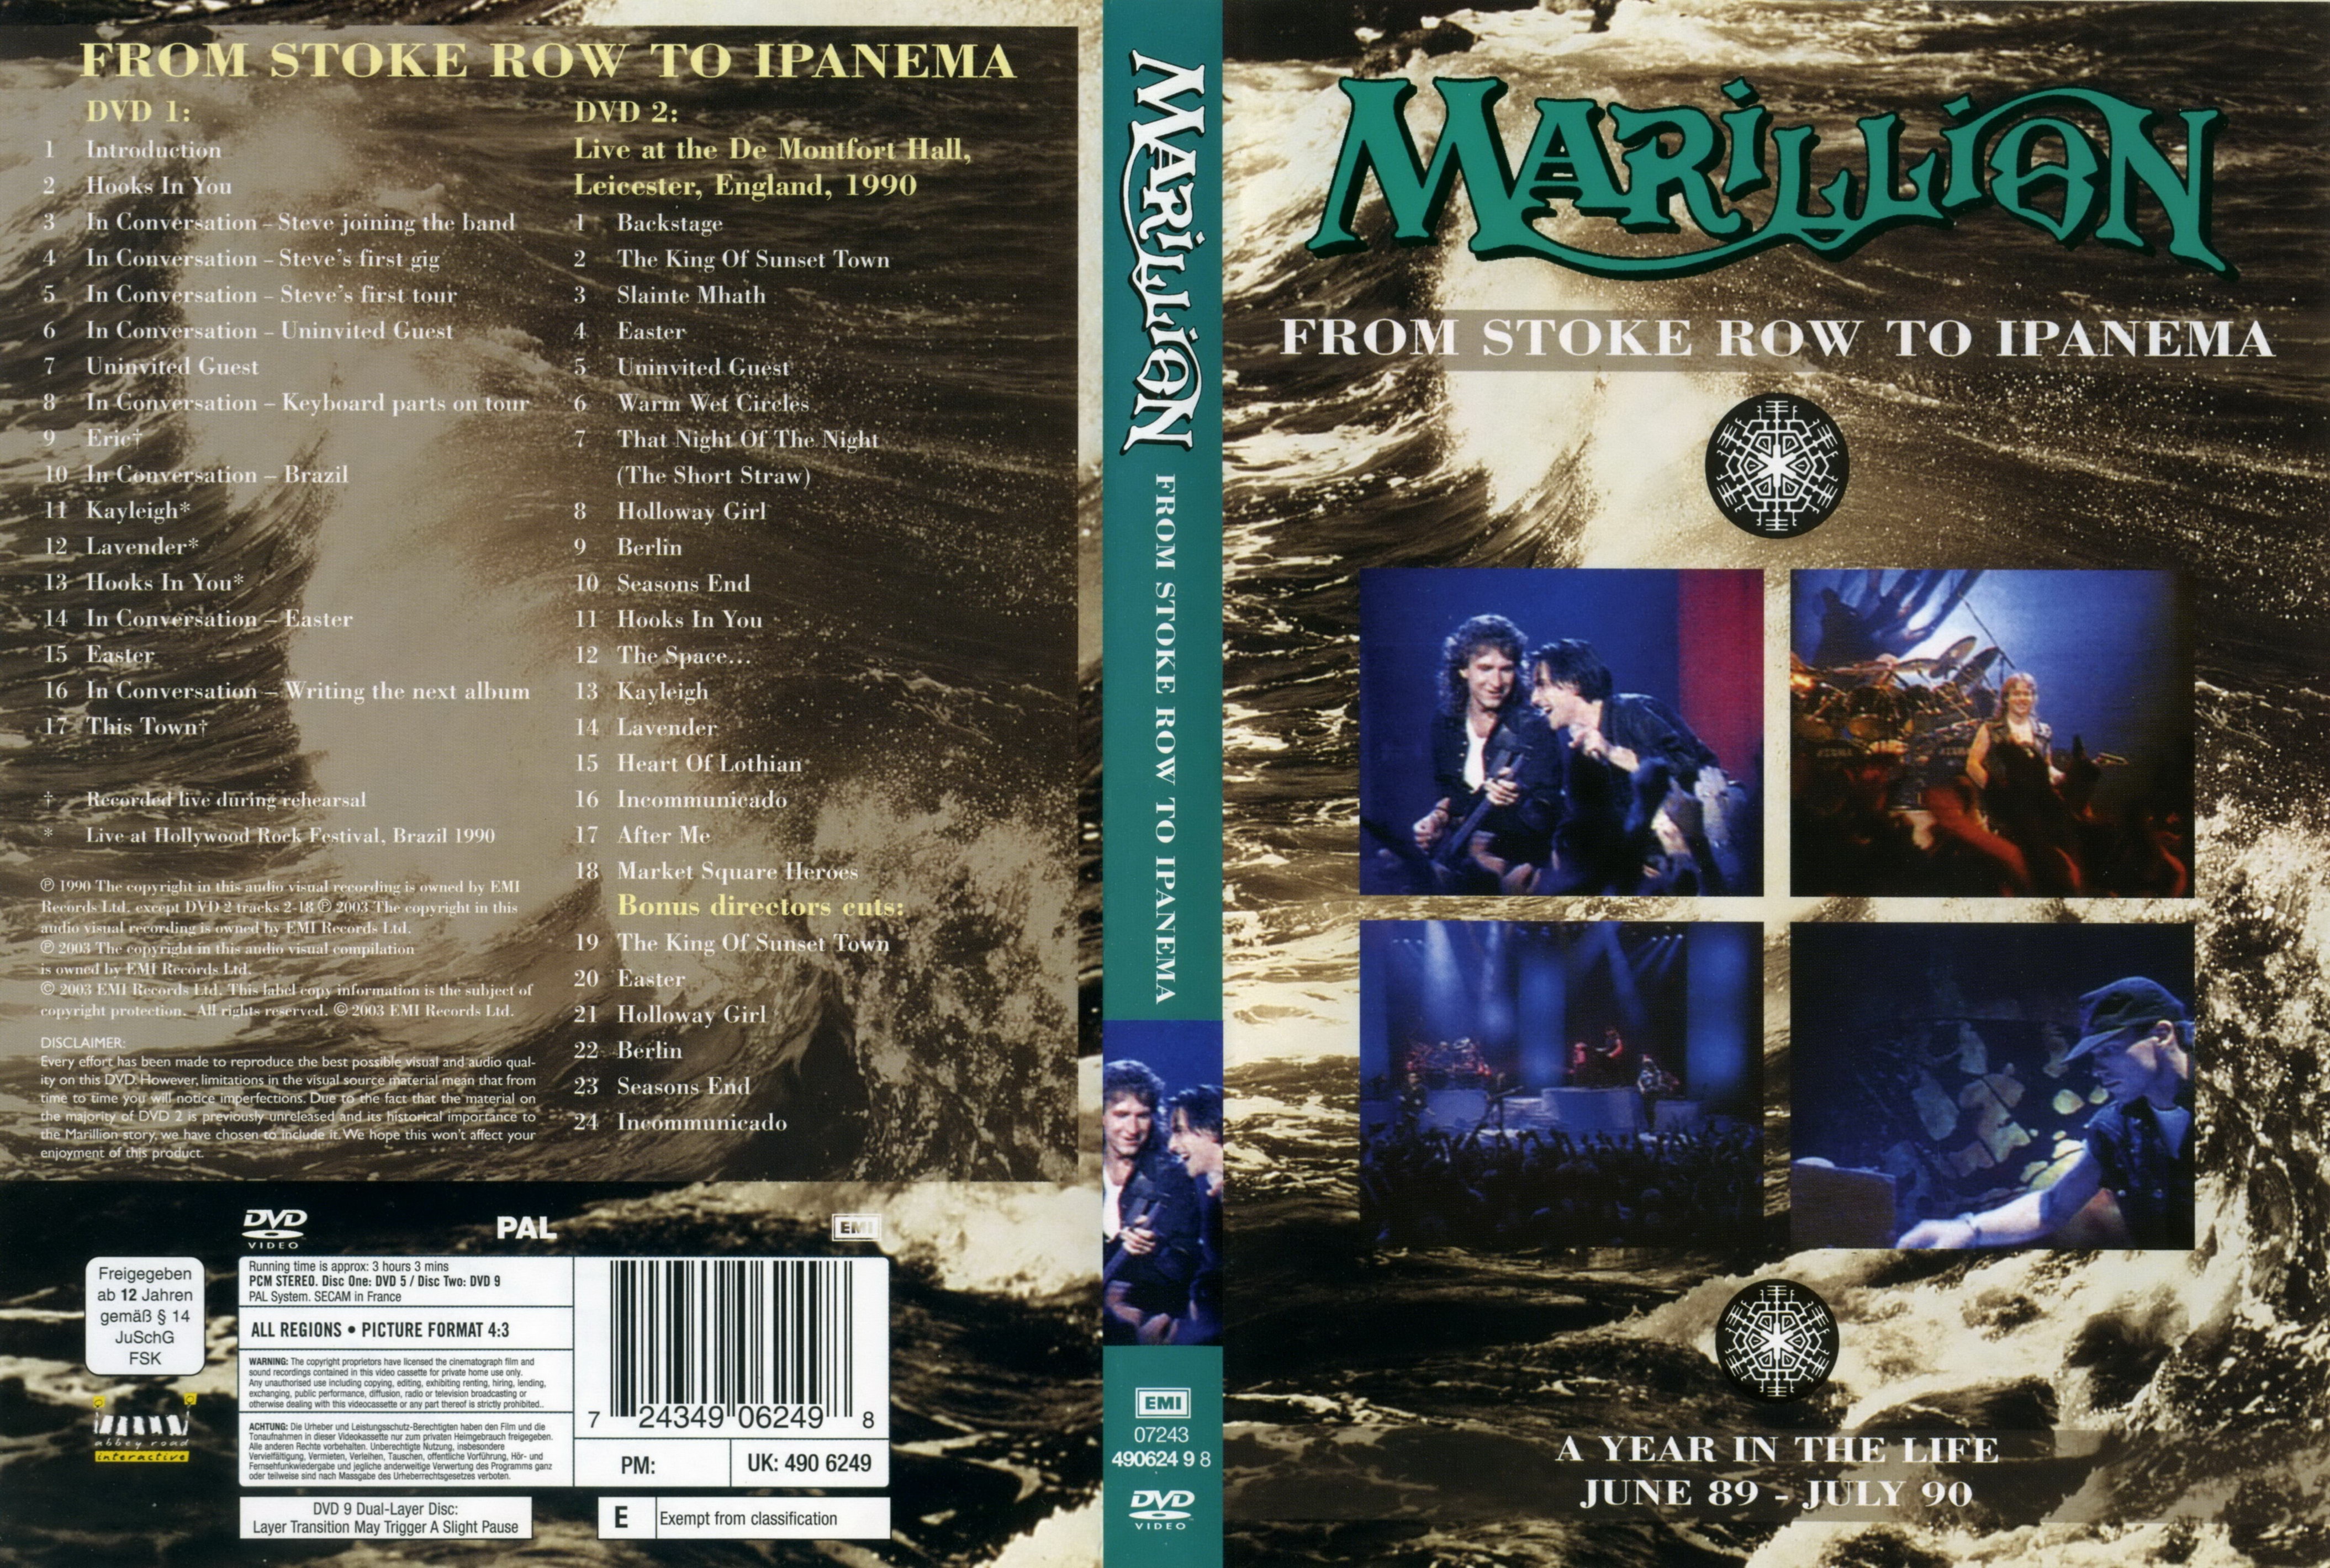 Jaquette DVD Marillion From stoke row to ipanema